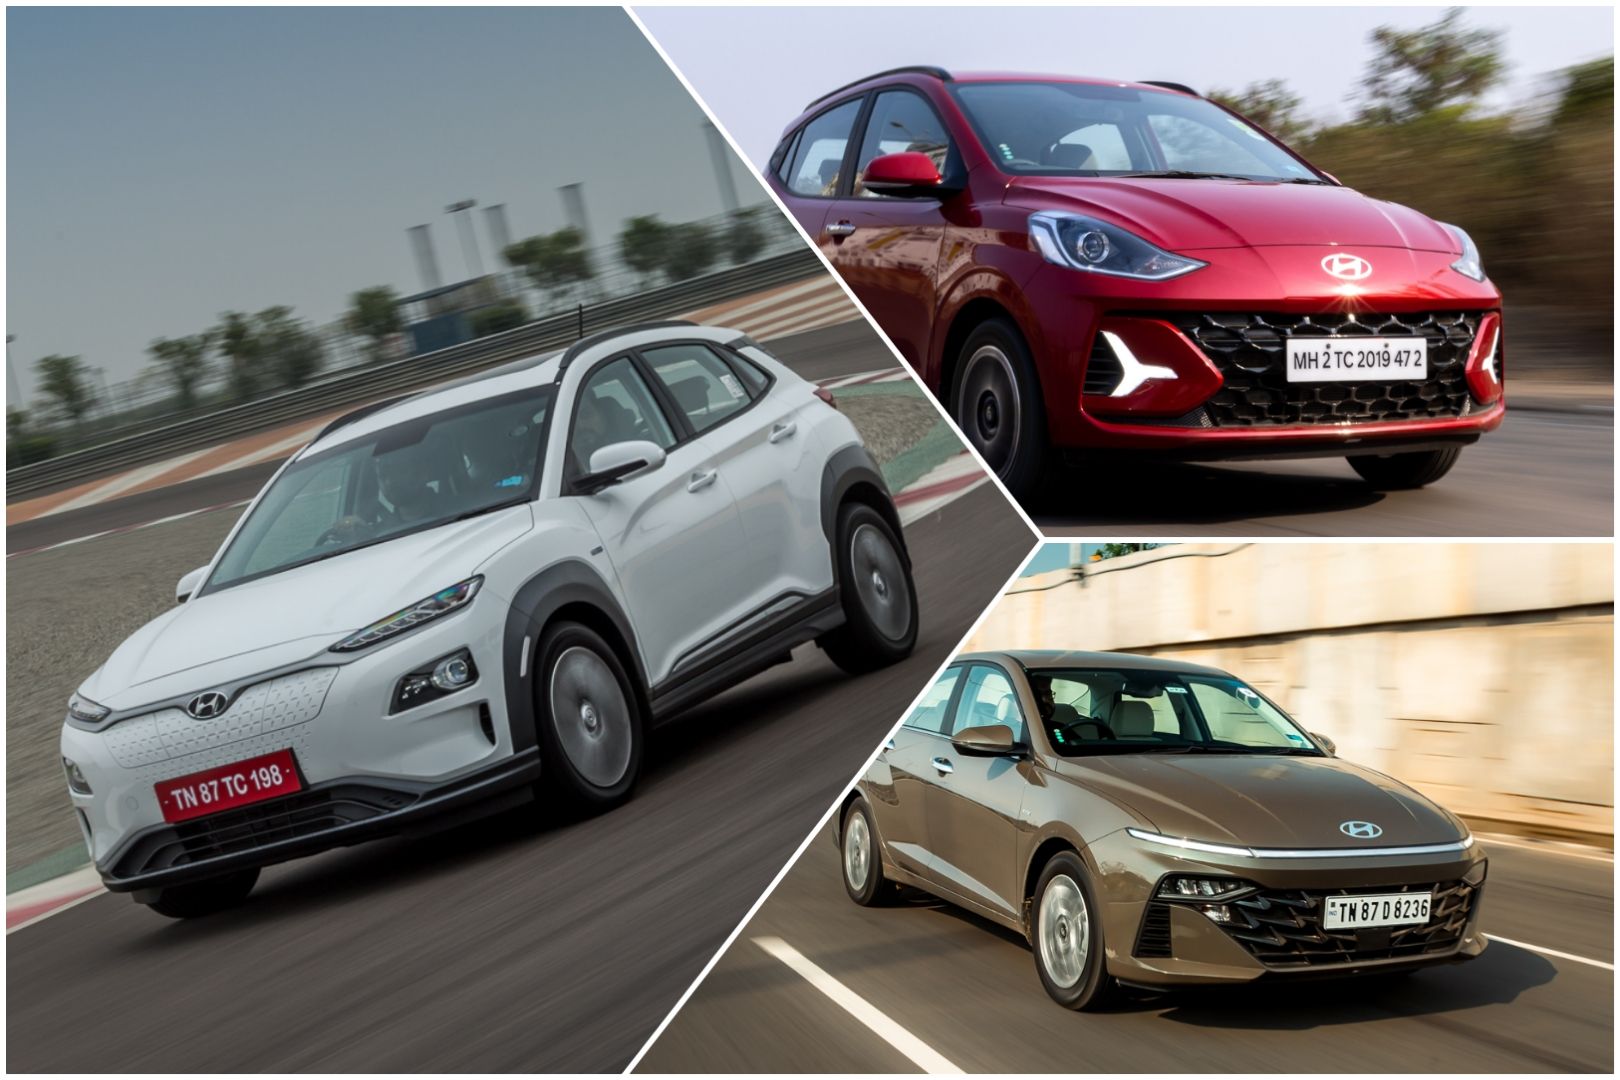 Drive Home A Hyundai Car With Benefits Of Up To Rs 2 lakh This September